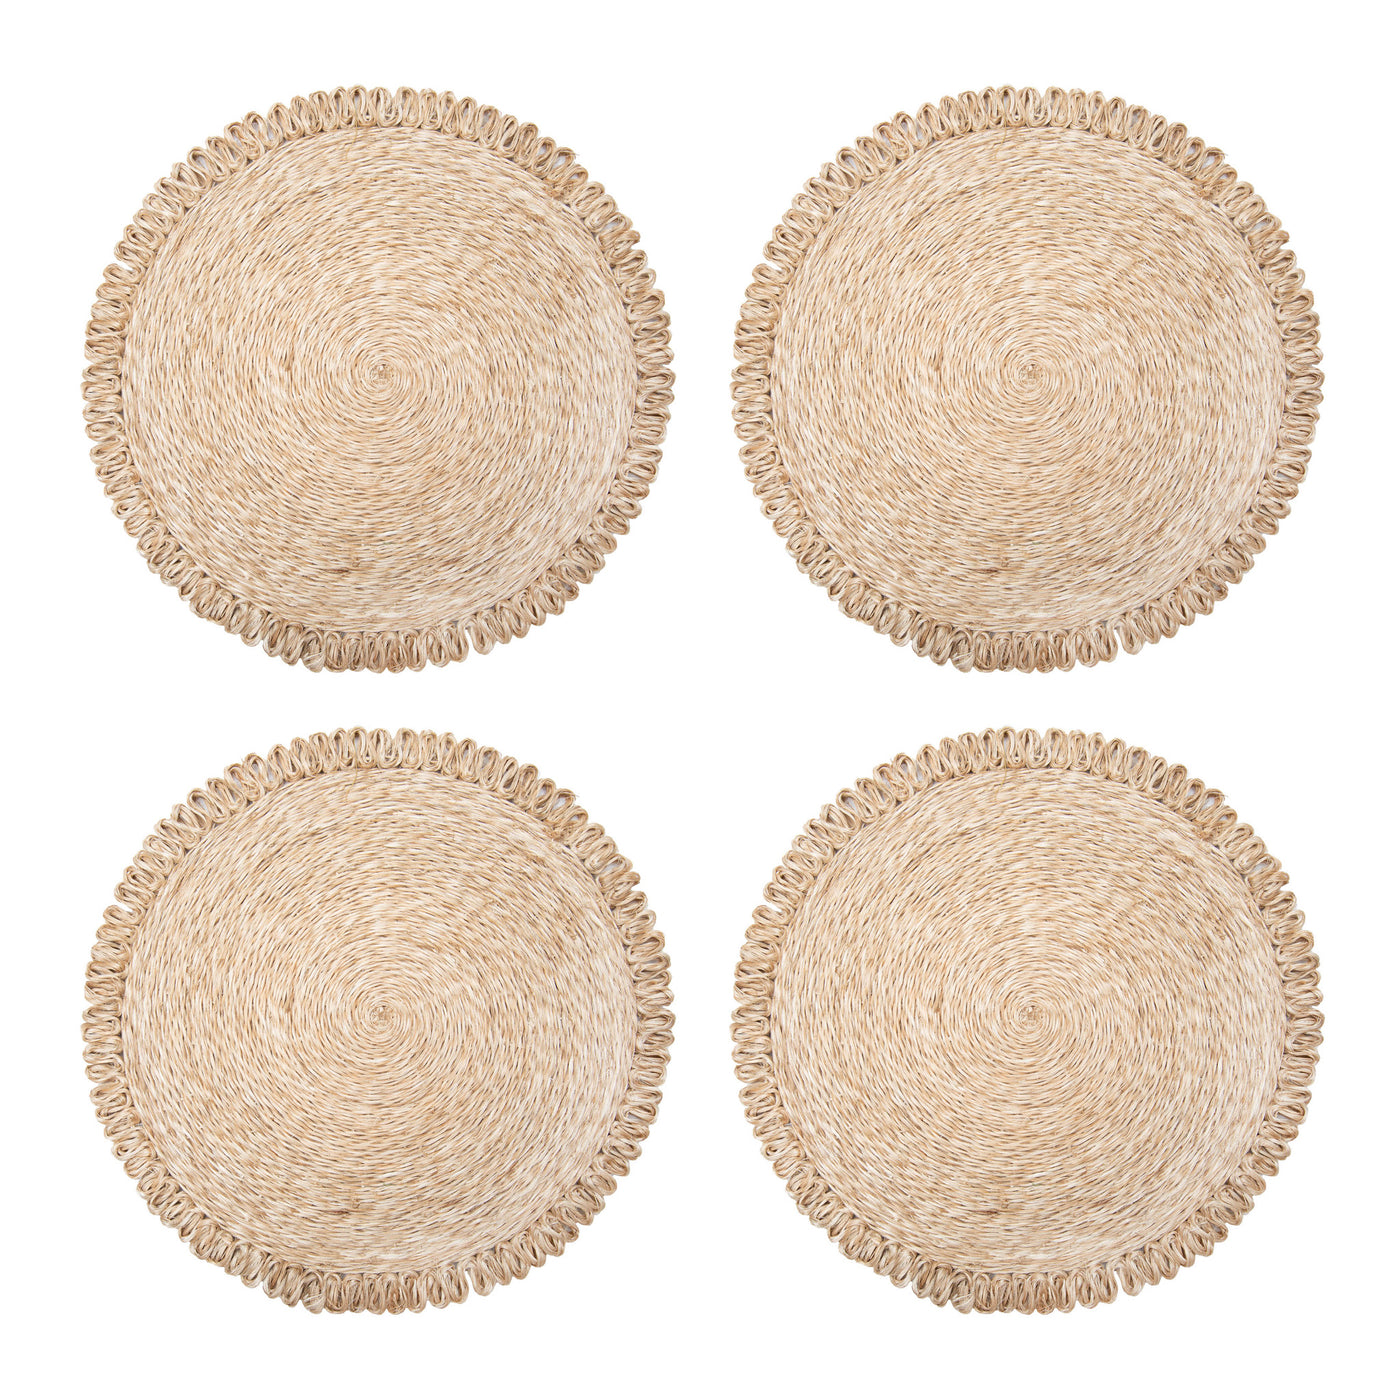 Loopy Abaca Natural 15" Round Placemats - Set of 4